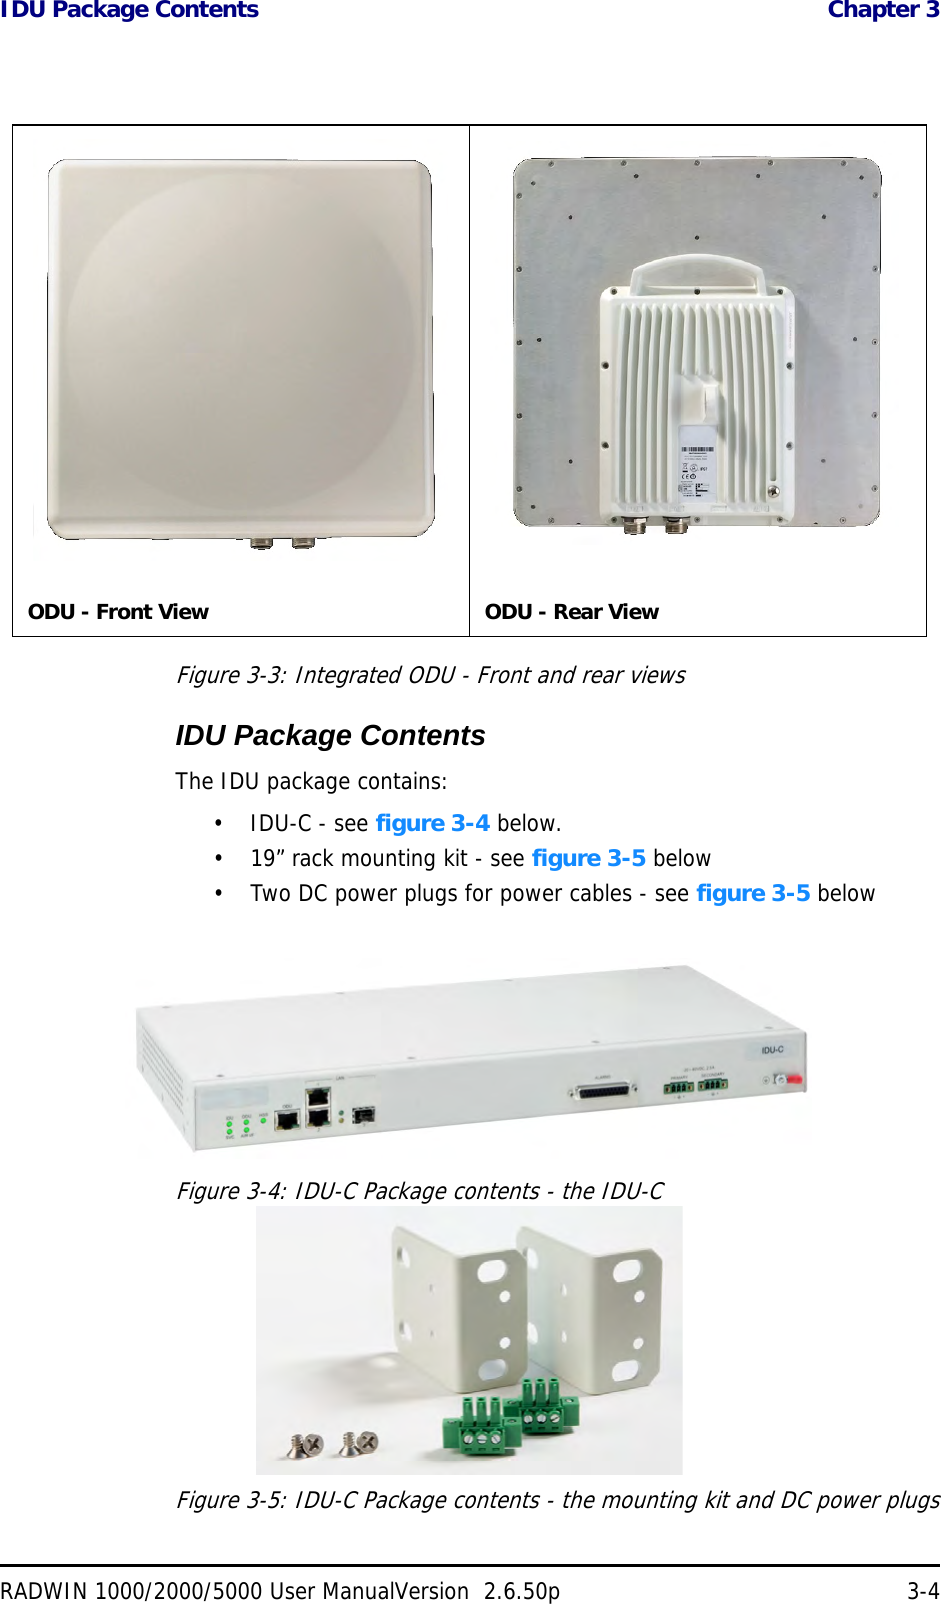 IDU Package Contents  Chapter 3RADWIN 1000/2000/5000 User ManualVersion  2.6.50p 3-4Figure 3-3: Integrated ODU - Front and rear viewsIDU Package ContentsThe IDU package contains:• IDU-C - see figure 3-4 below.• 19” rack mounting kit - see figure 3-5 below• Two DC power plugs for power cables - see figure 3-5 belowFigure 3-4: IDU-C Package contents - the IDU-CFigure 3-5: IDU-C Package contents - the mounting kit and DC power plugsODU - Front View ODU - Rear View